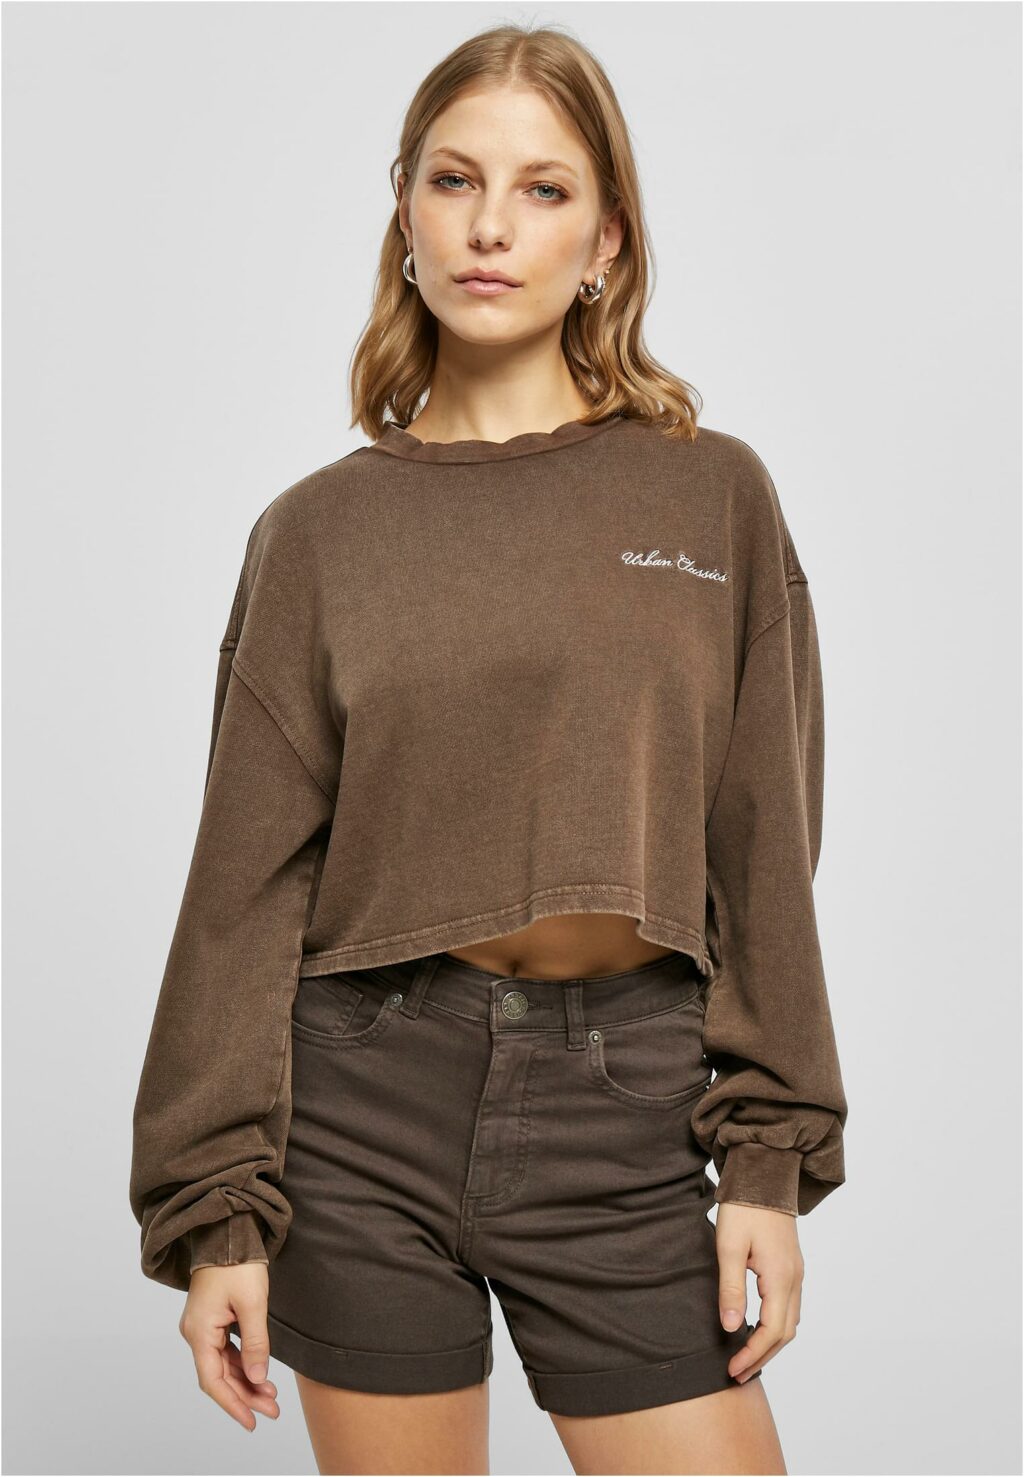 Urban Classics Ladies Cropped Small Embroidery Terry Crewneck brown TB5461